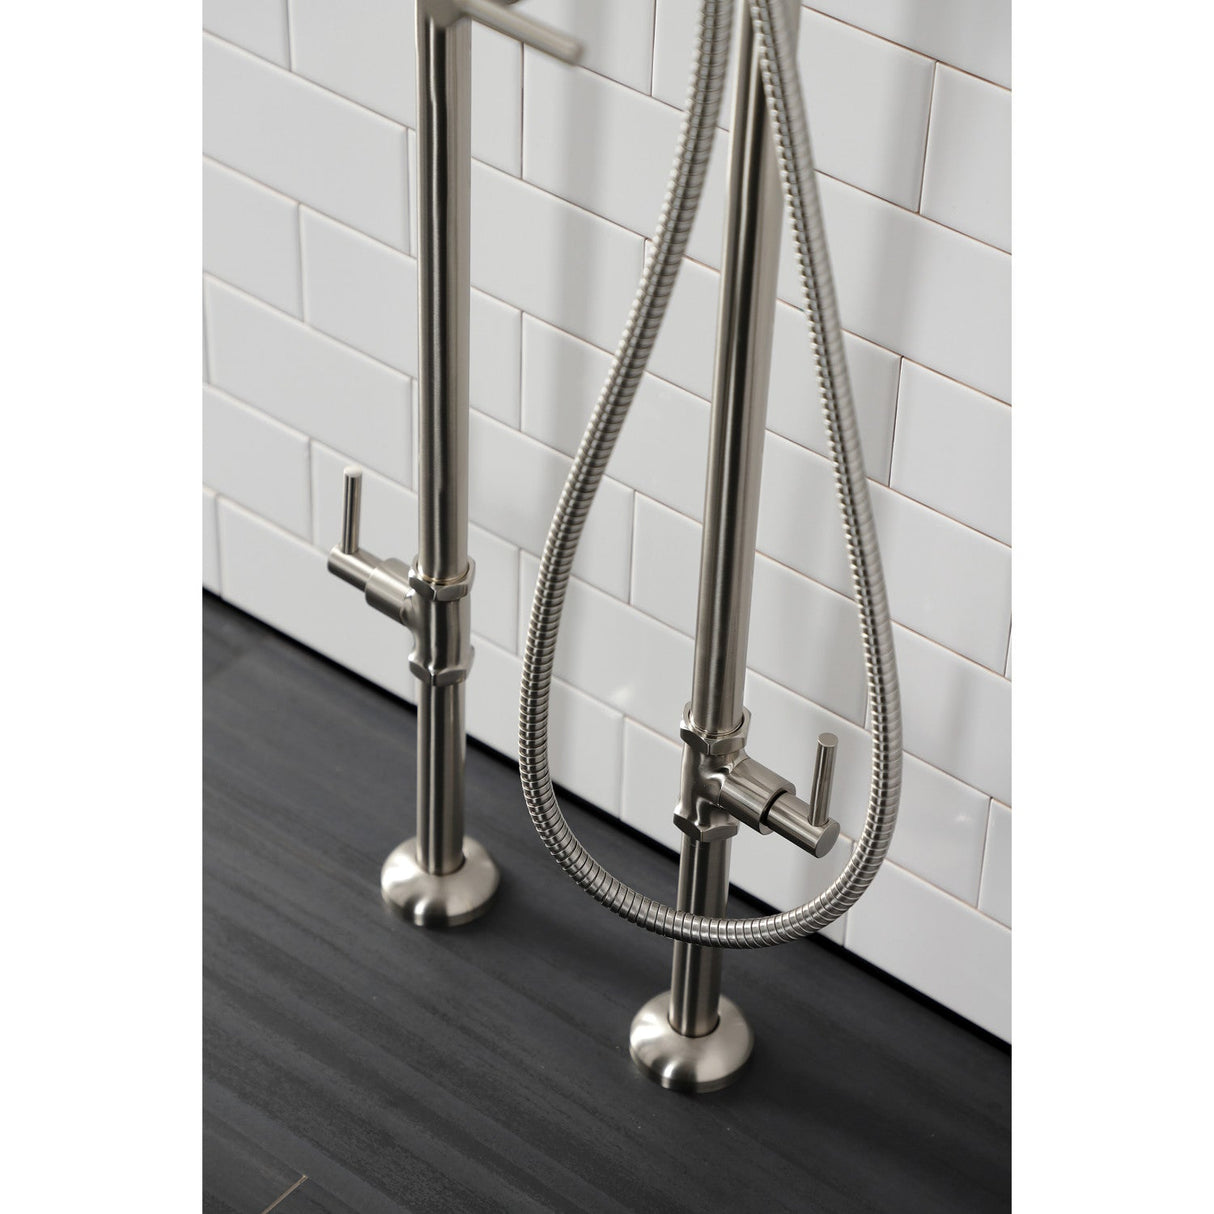 Concord CCK8108DL Freestanding Tub Faucet with Supply Line and Stop Valve, Brushed Nickel